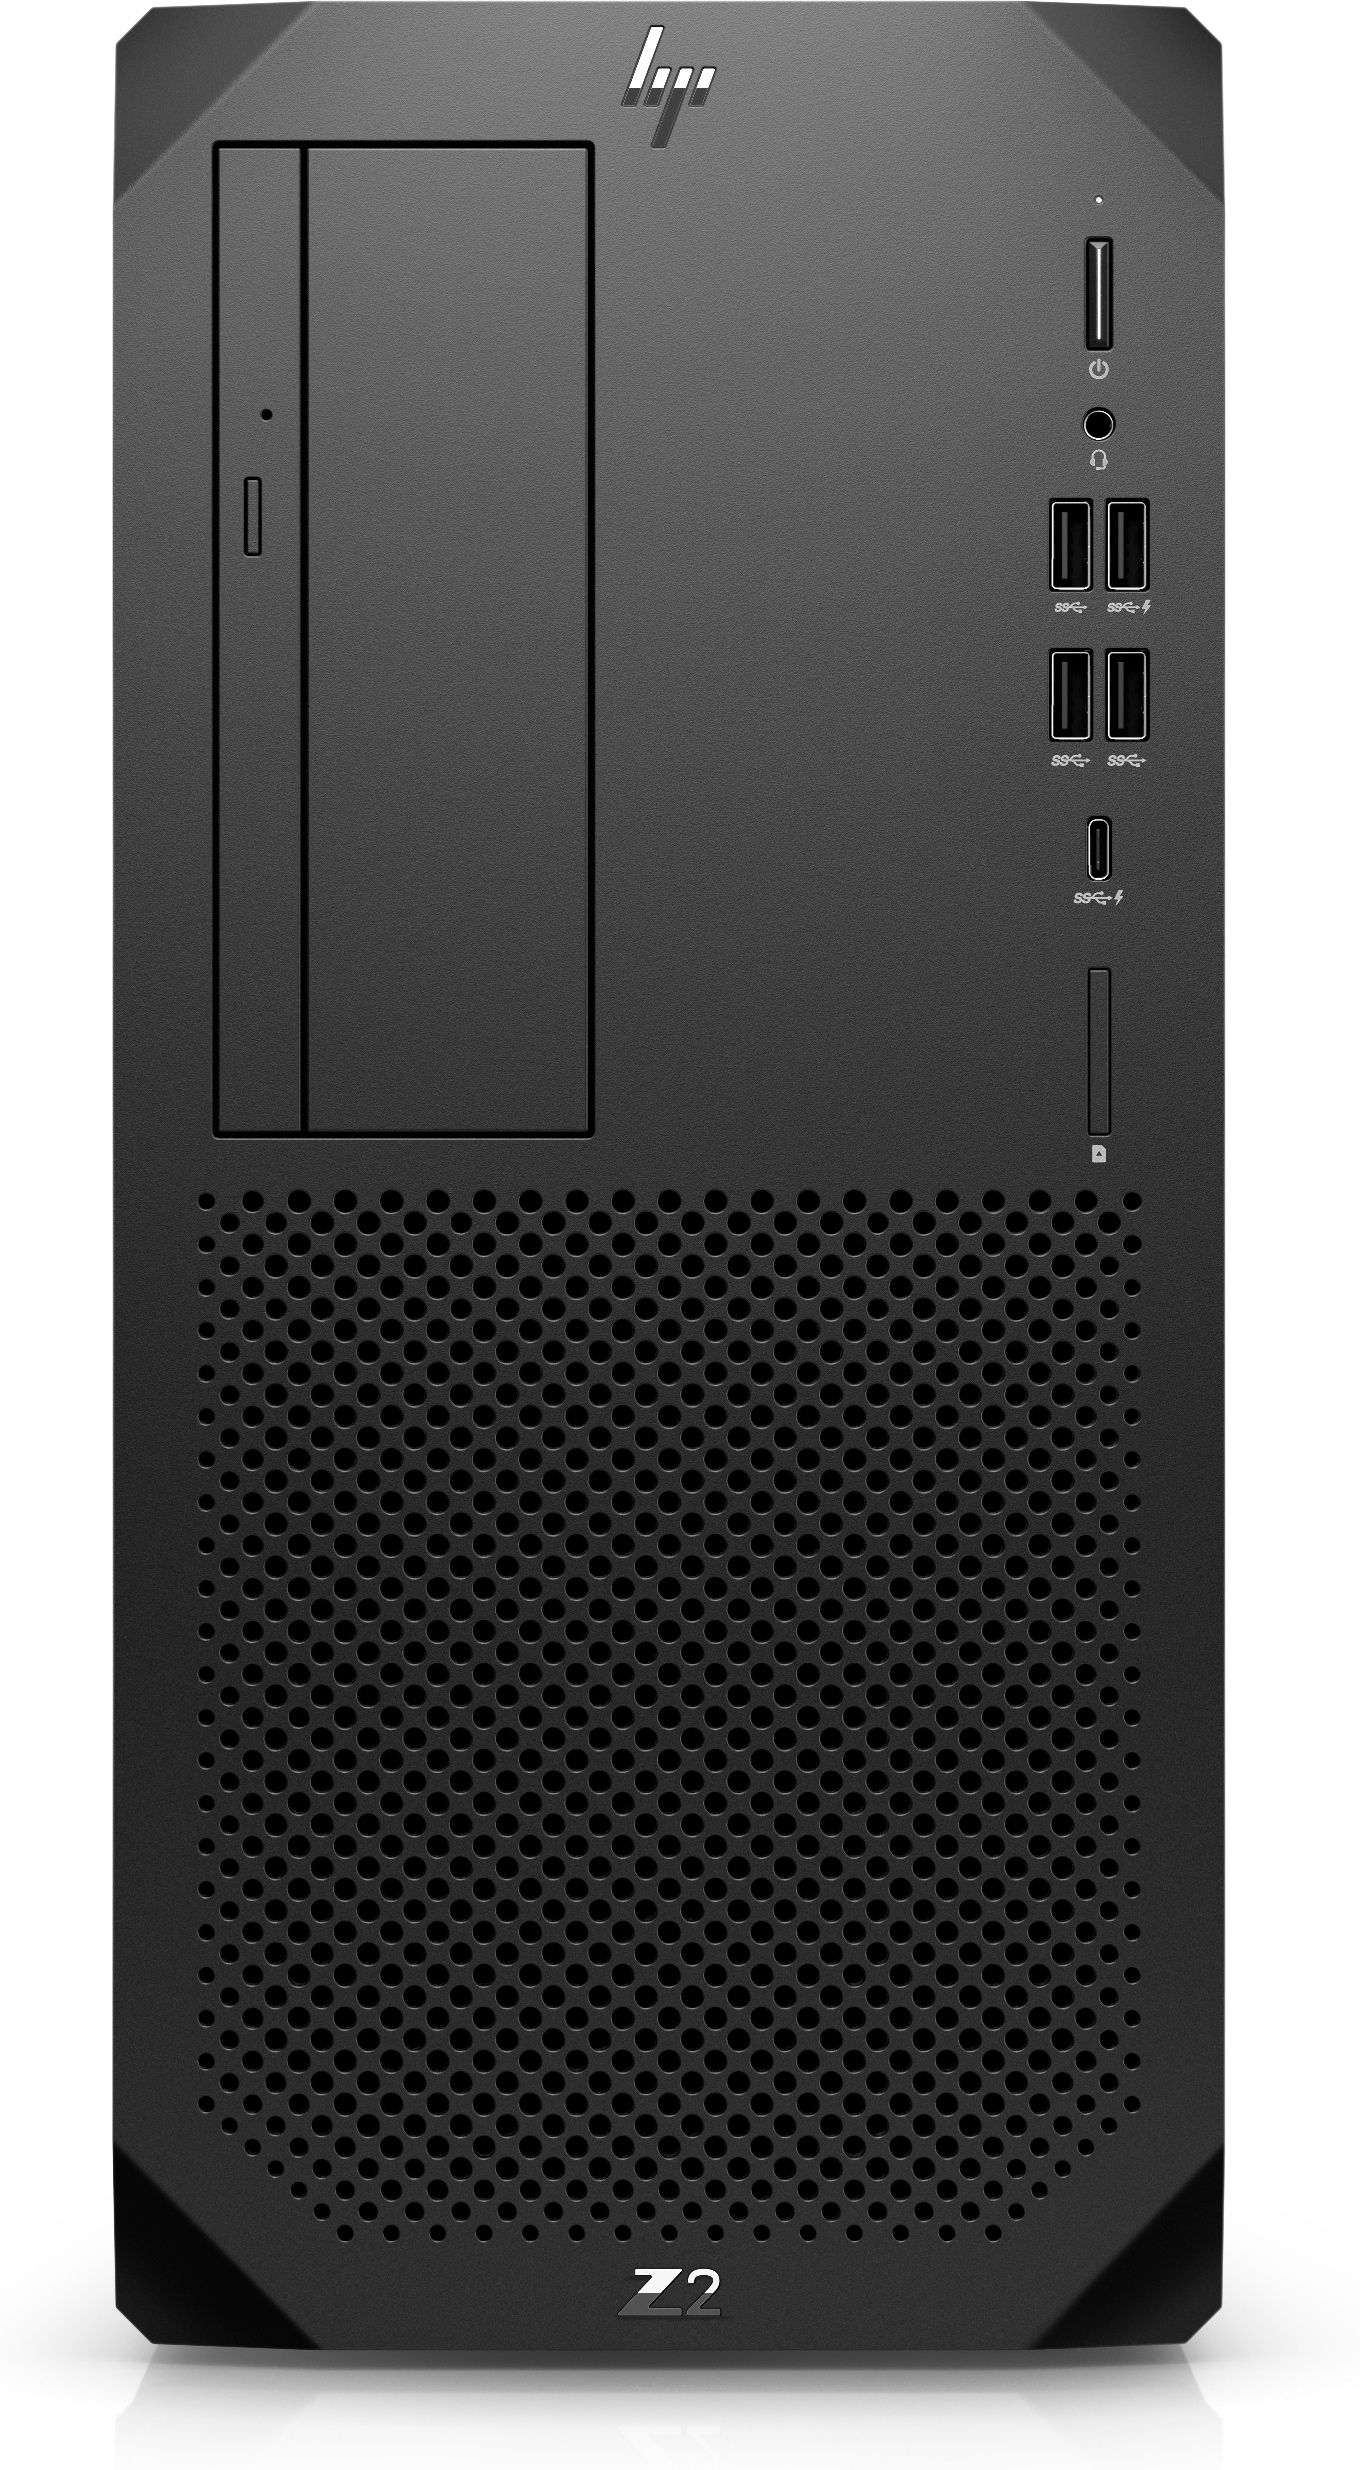 Hp Hp Workstation Z2 G9 - Tower - Core I9 12900 2.4 Ghz - Vpro - 16 Gb - Ssd 512 Gb - German 5f0c1ea#abd - xep01